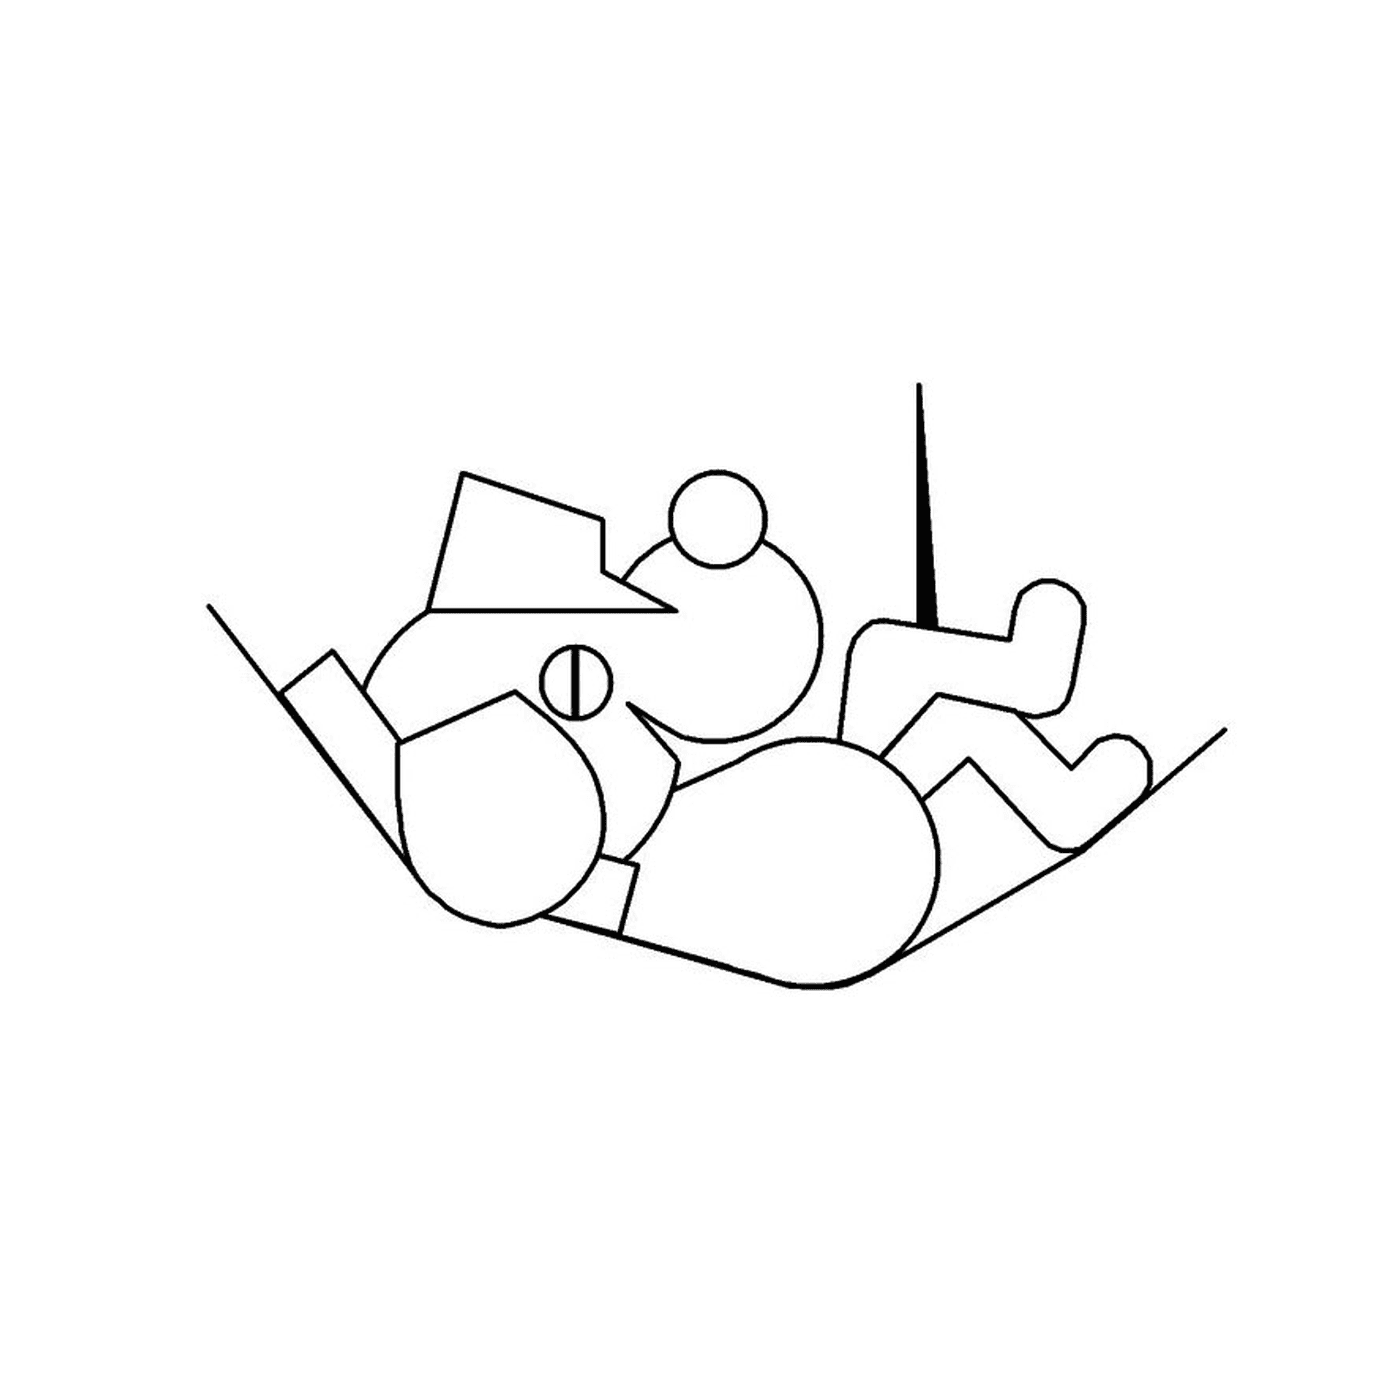  An abstraction of people sitting in piles 